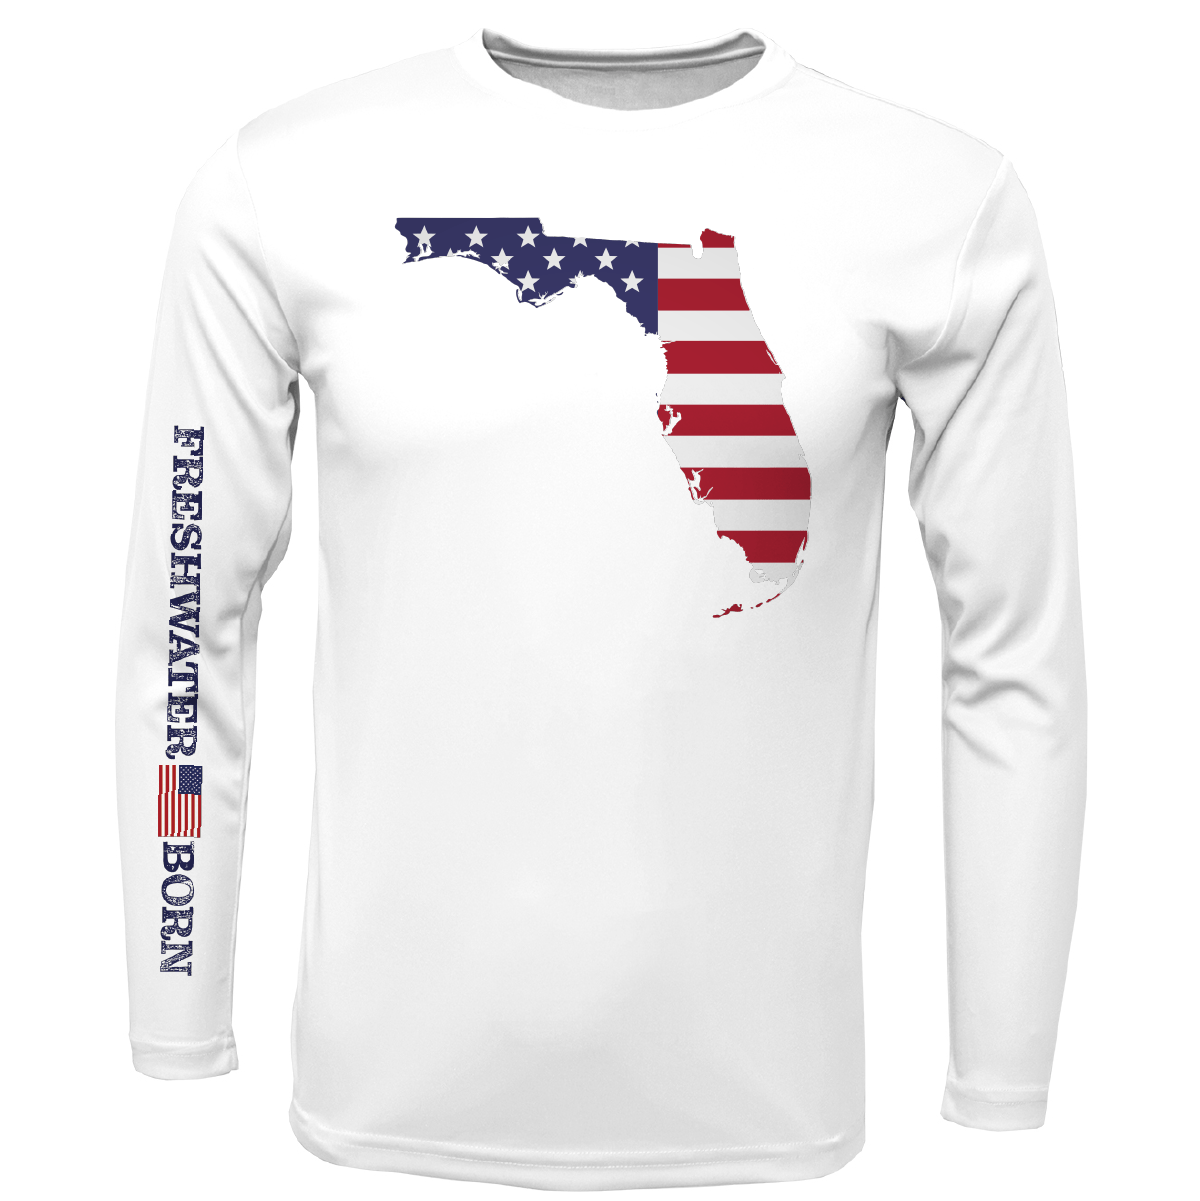 Saltwater Born Shirts State of Florida USA Freshwater Born Girl's Long Sleeve UPF 50+ Dry-Fit Shirt